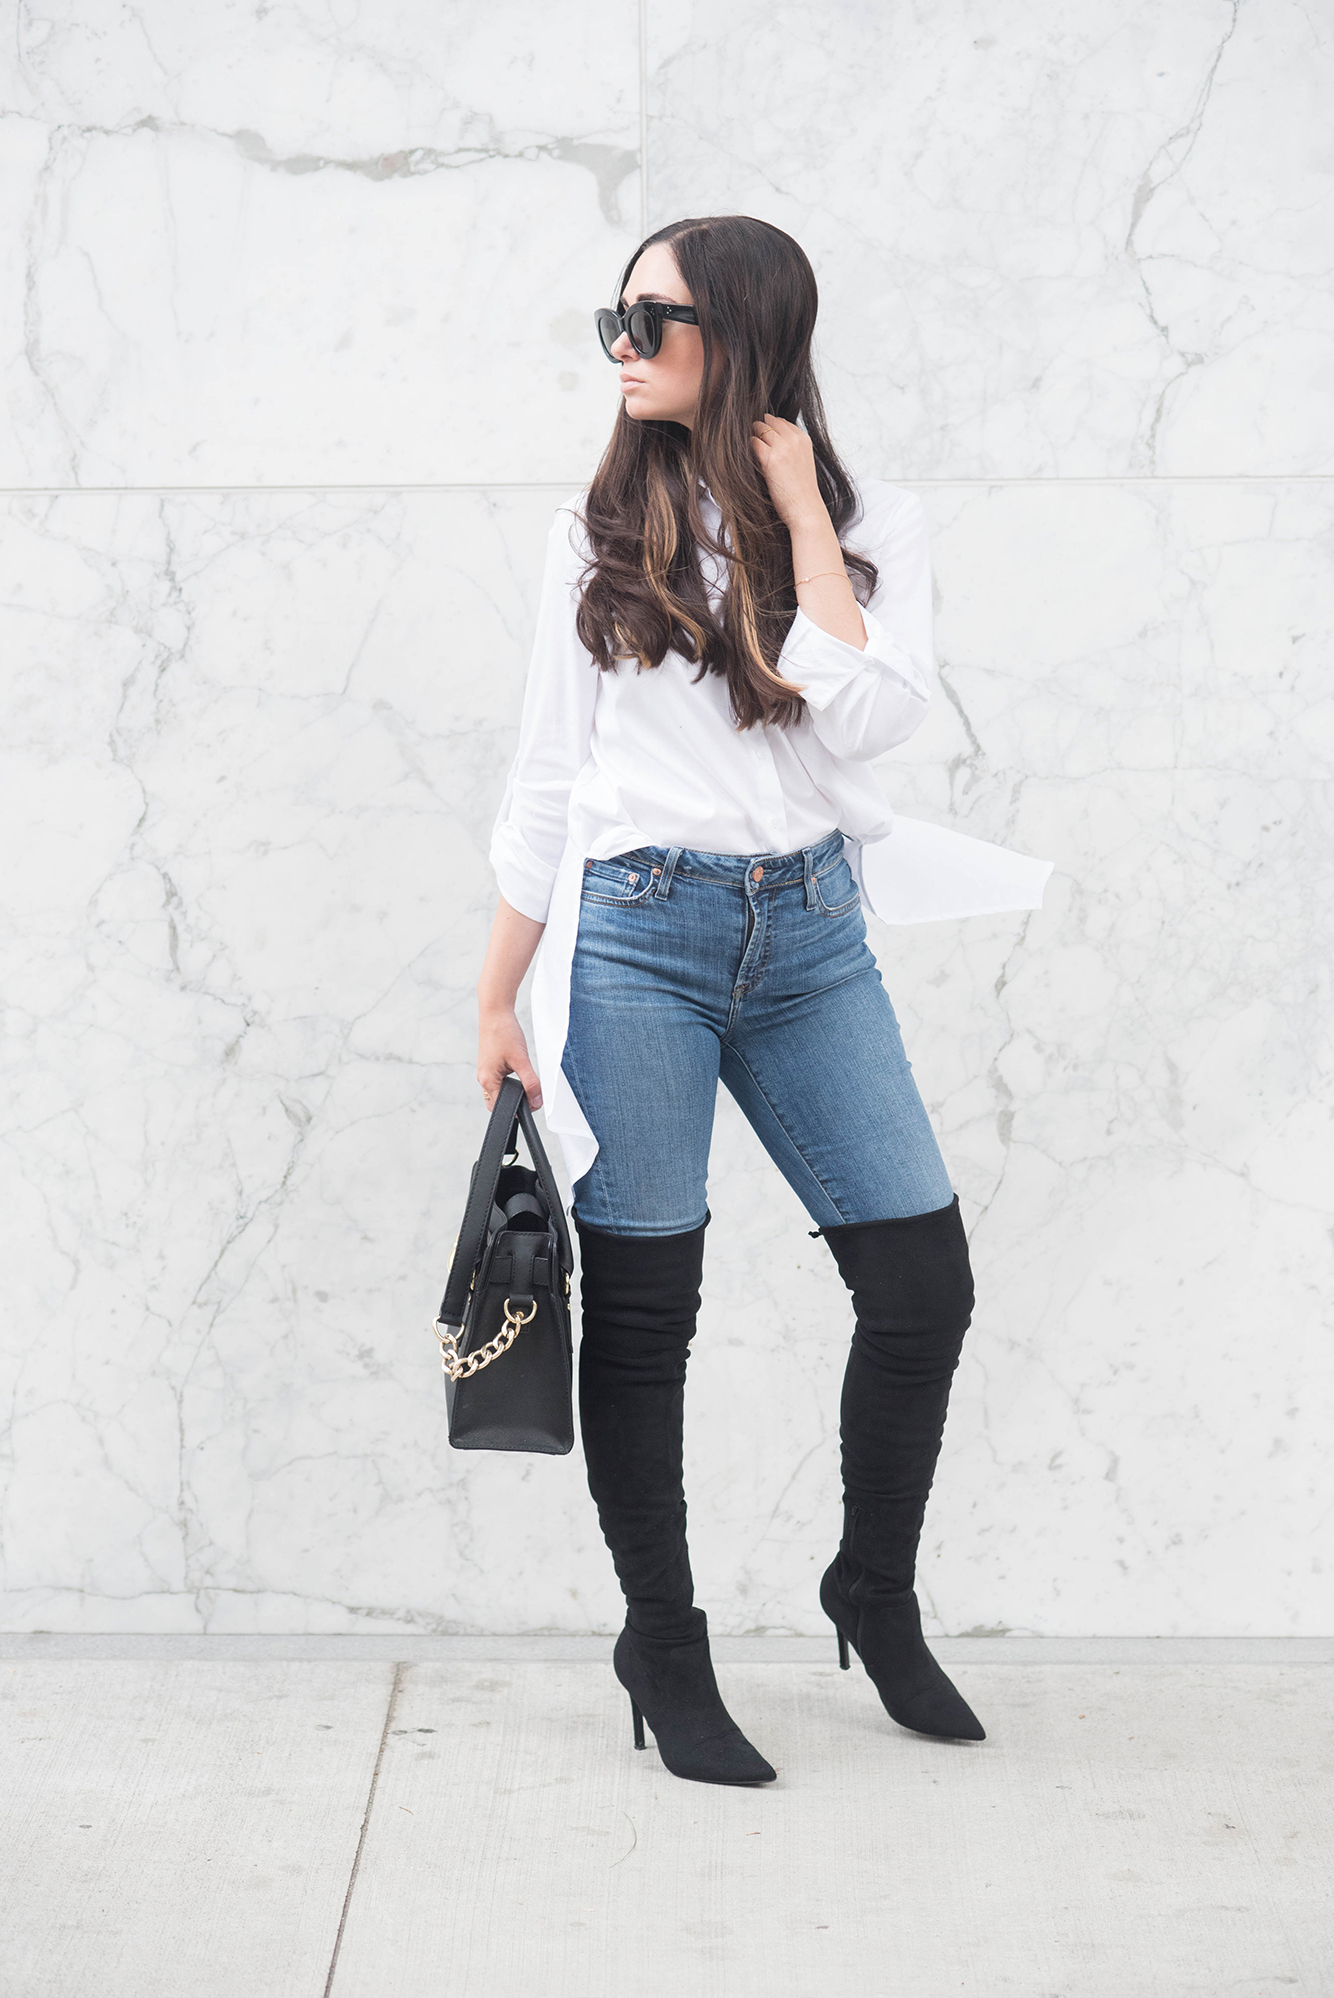 coco-and-vera-best-vancouver-fashion-blog-best-canadian-fashion-blog-top-blogger-street-style-marled-by-reunited-clothing-blouse-the-castings-jeans-aldo-black-suede-boots-celine-sunglasses